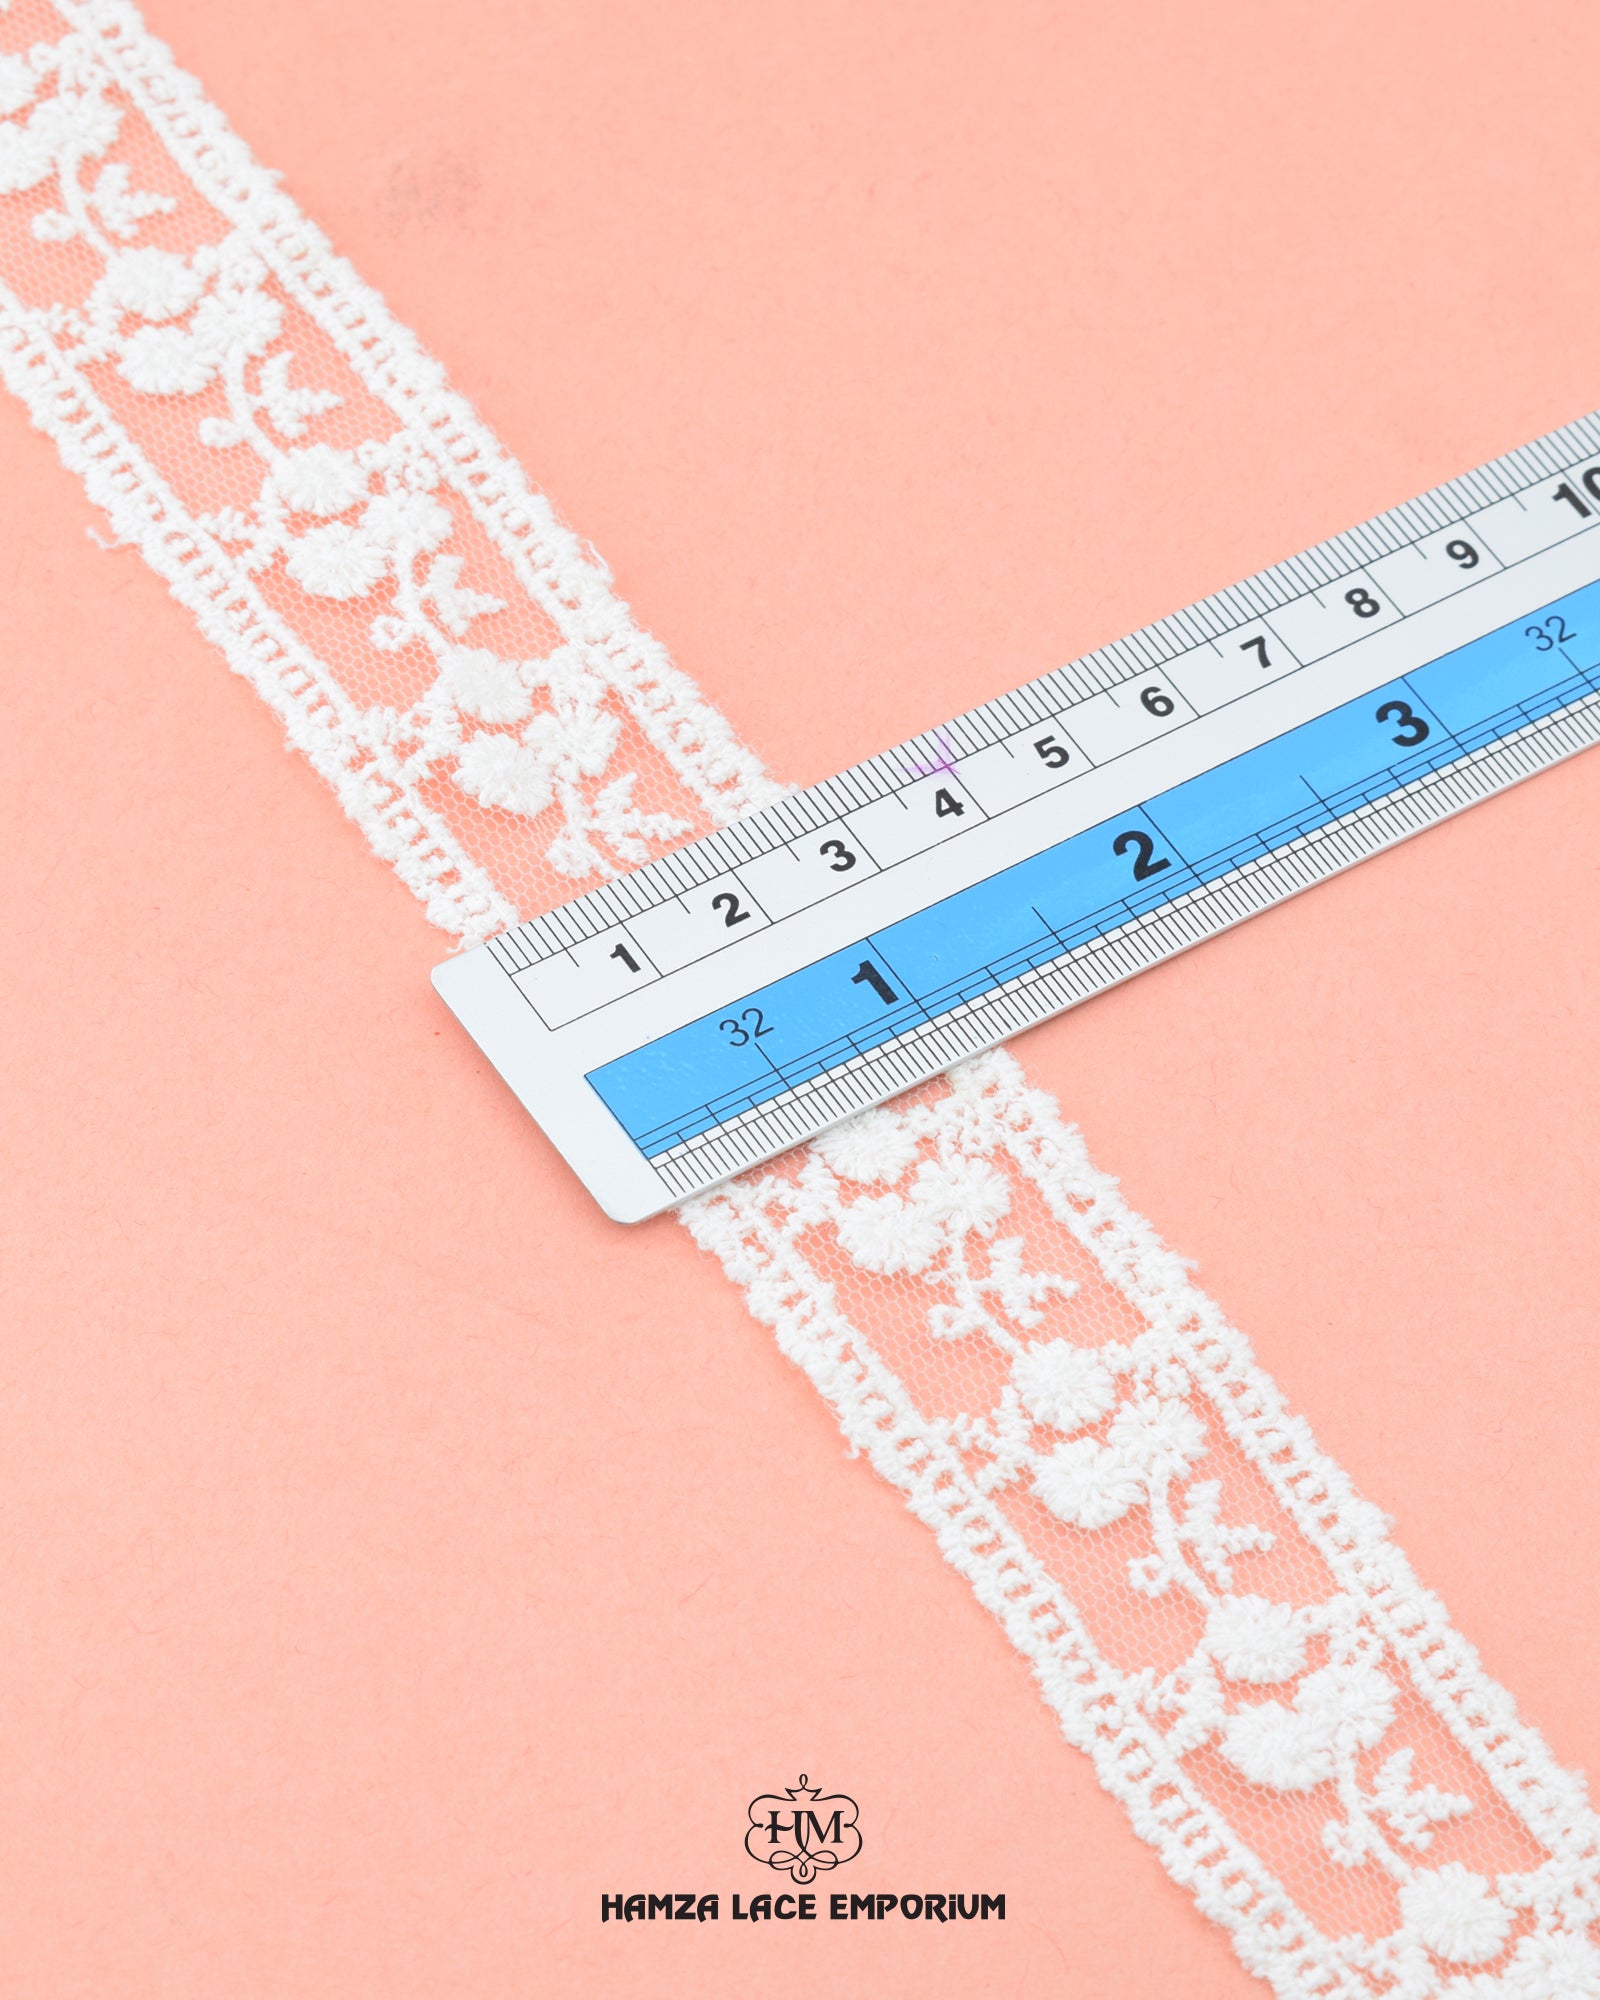 'Center Filling Lace 21538' displayed with a ruler to indicate its width as 0.5 inches.